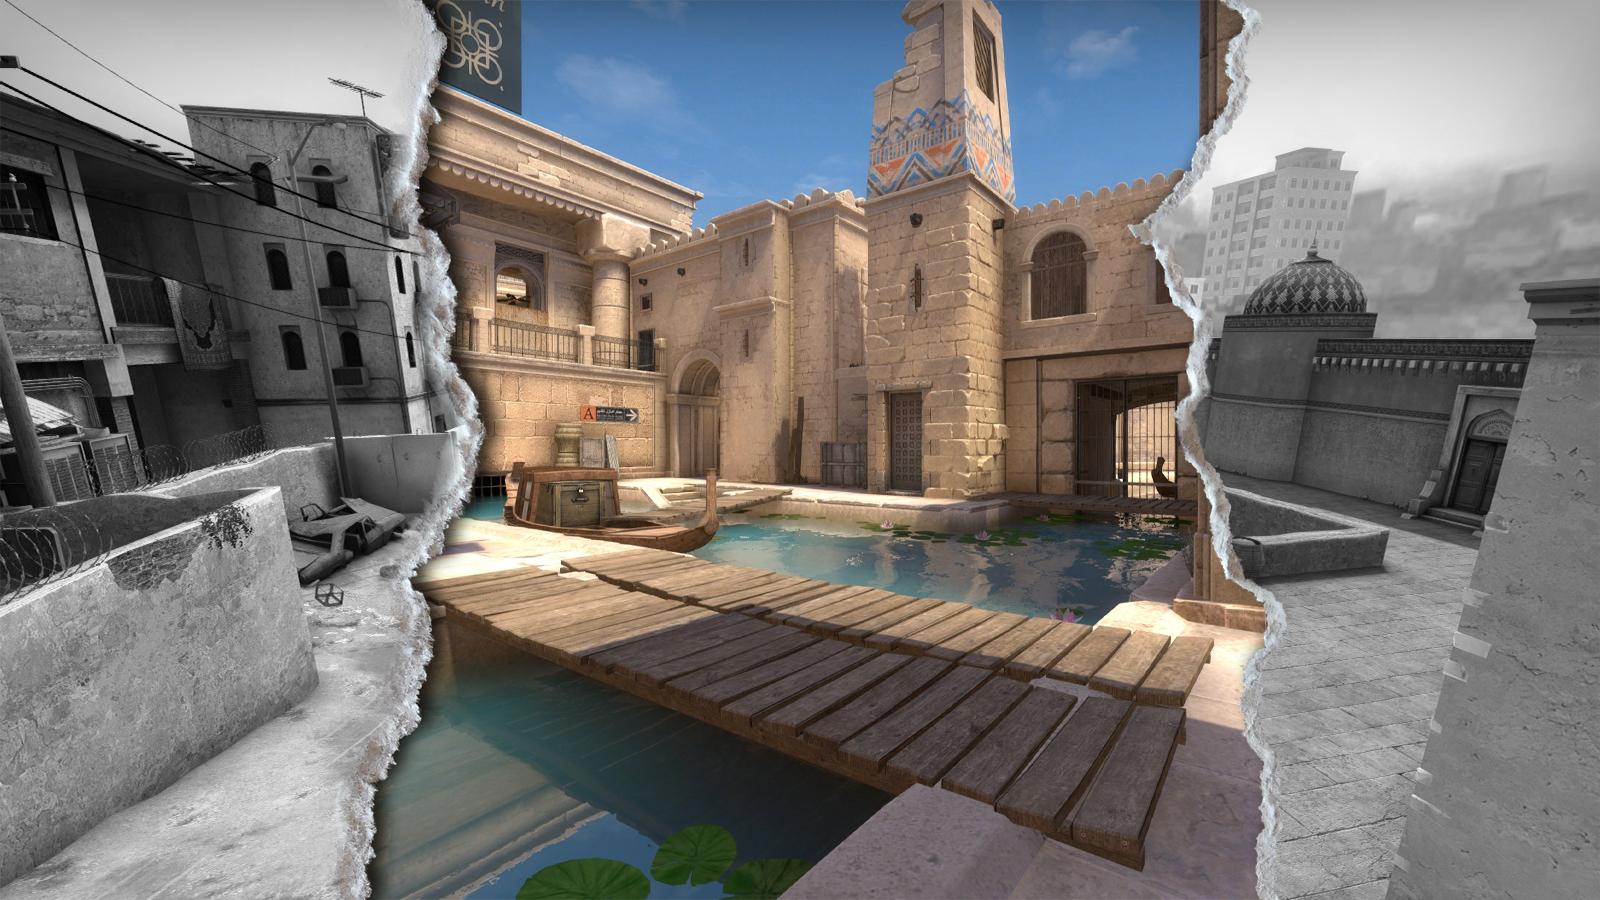 A Fan Discovered the Release Date of CS:GO On Source 2: He Deciphered  Valve's Post